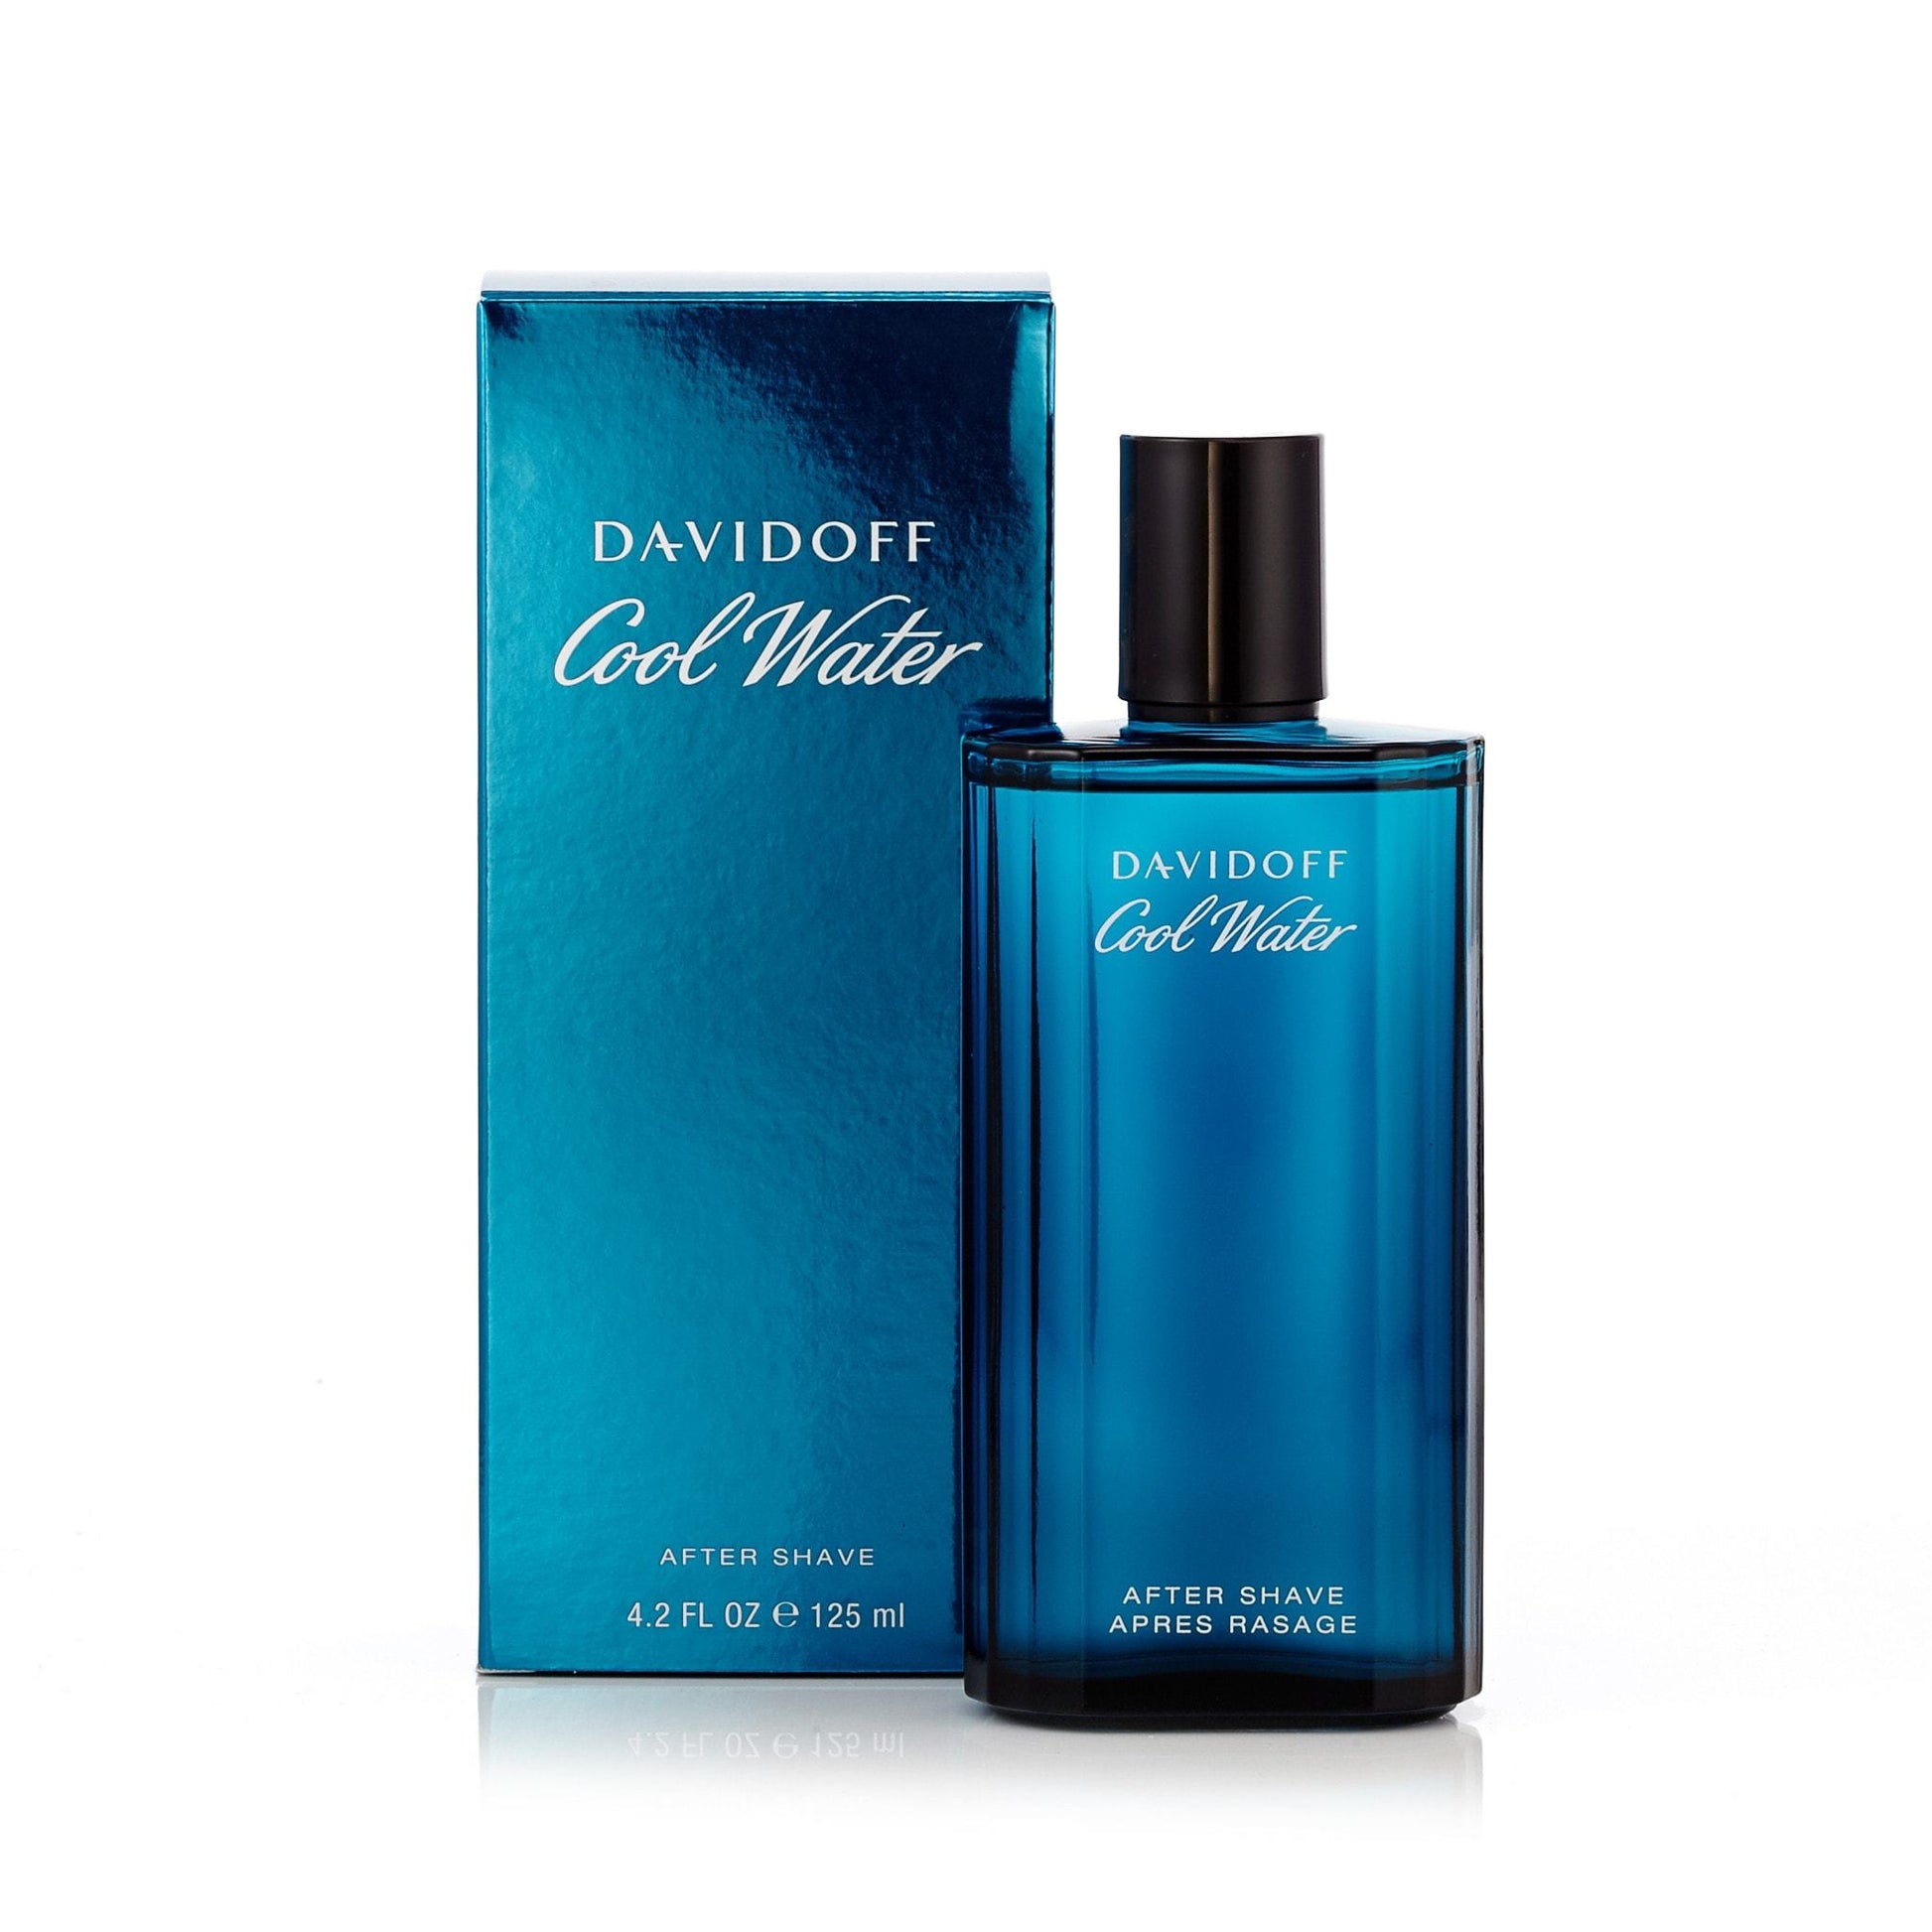 Cool Water After Shave for Men by Davidoff, Product image 1